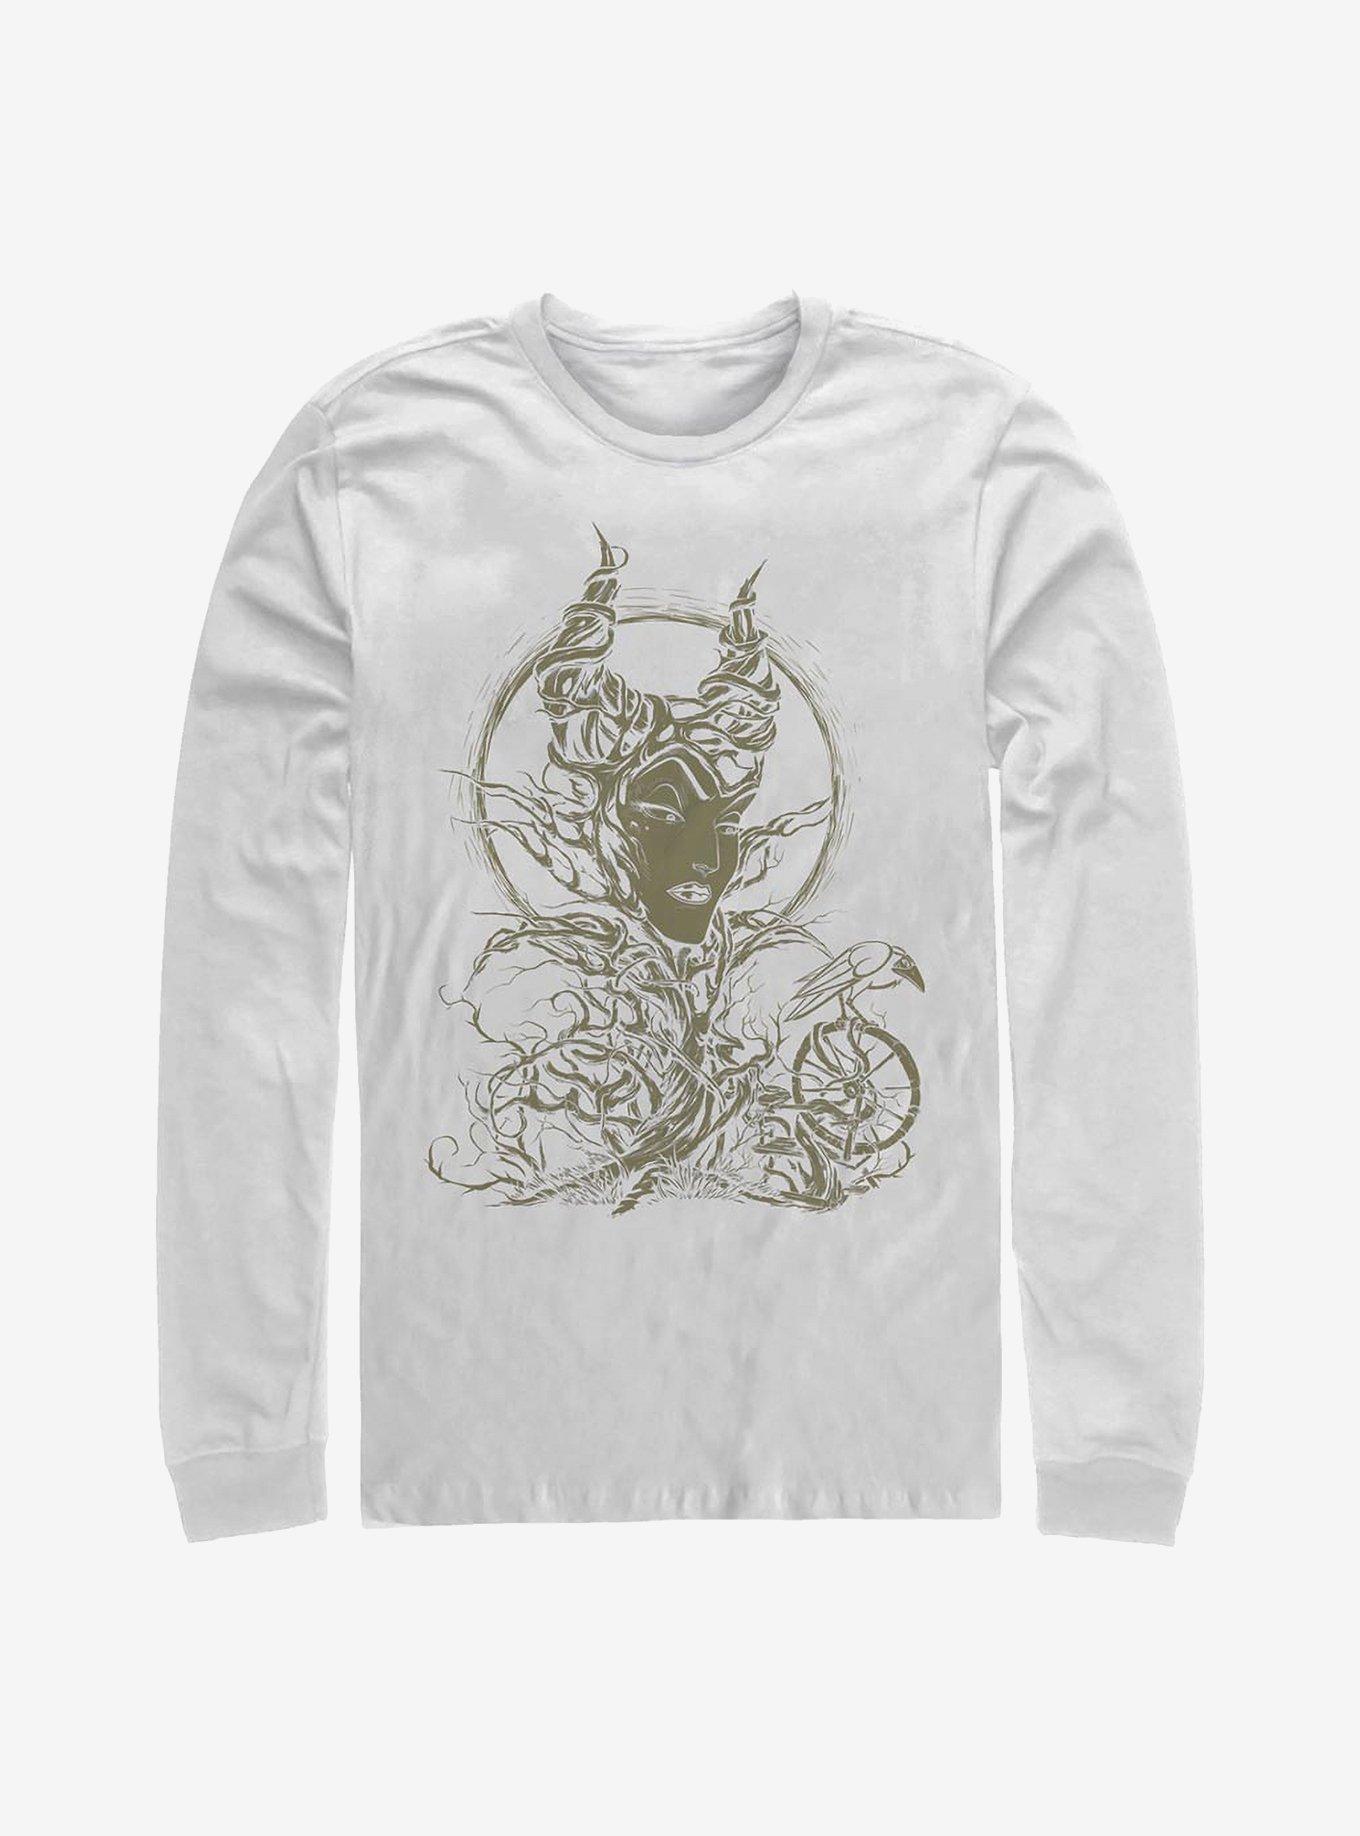 Disney Maleficent The Gift Long-Sleeve T-Shirt, WHITE, hi-res